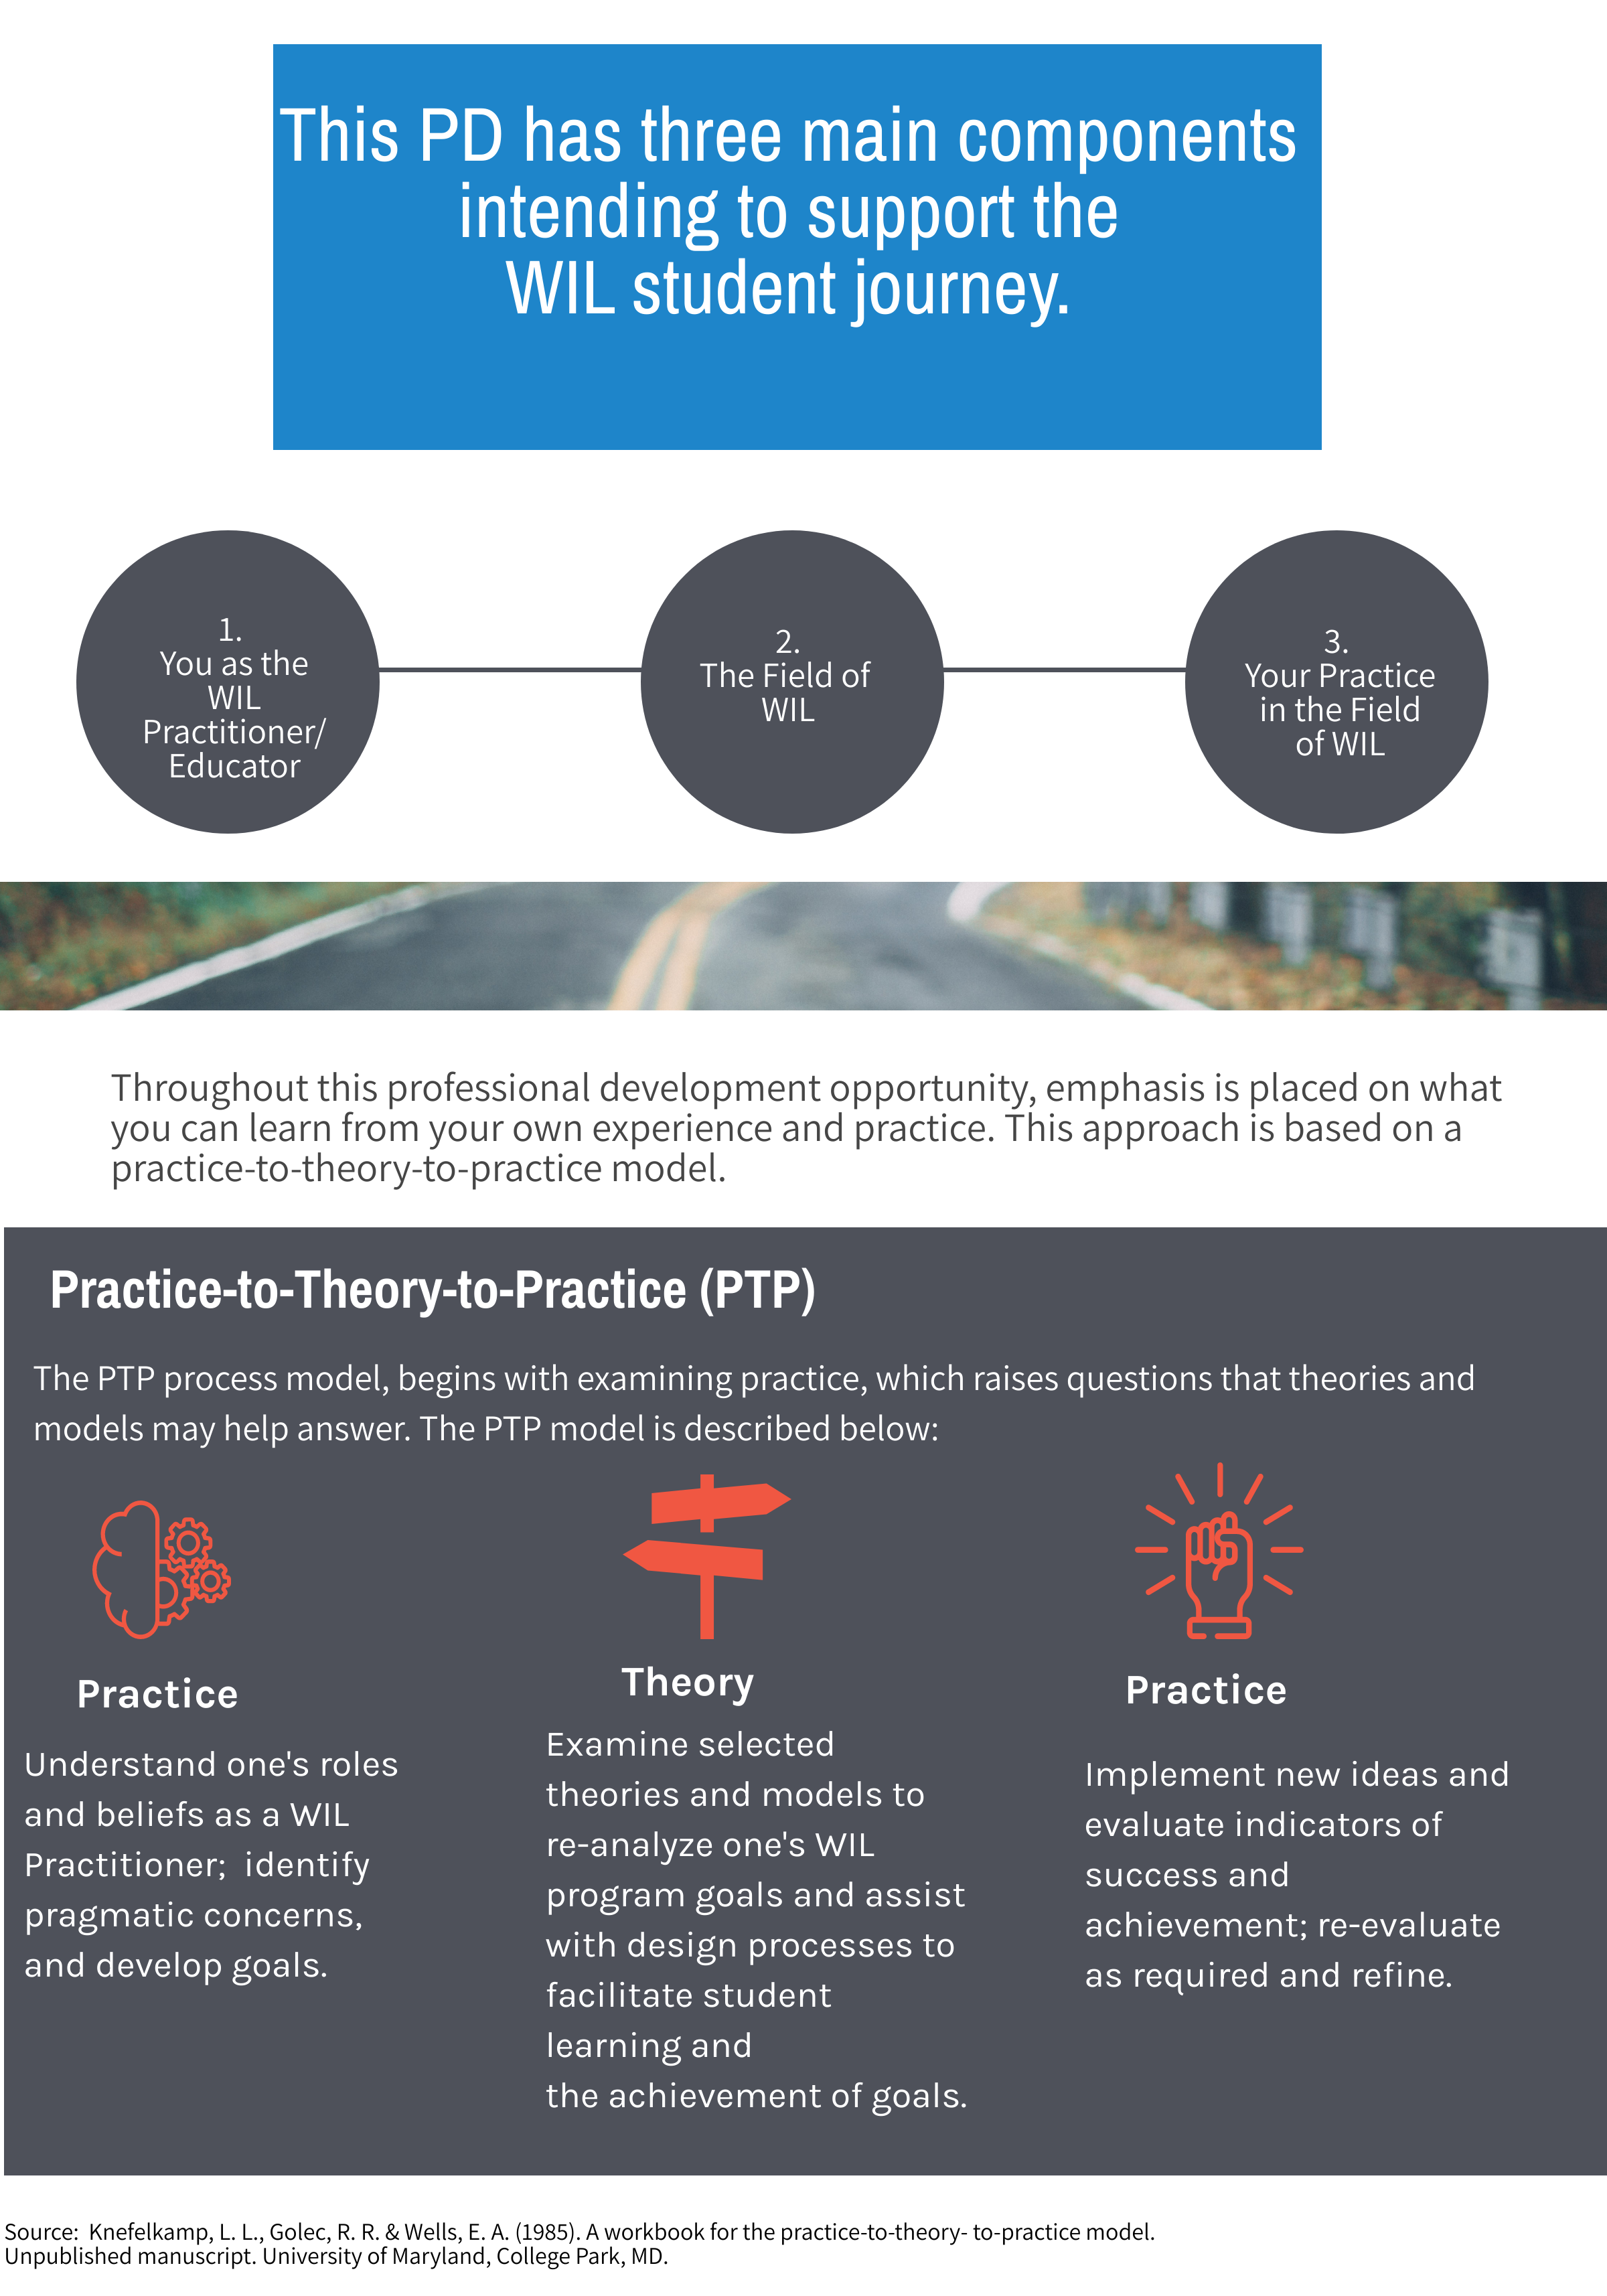 PTP overview